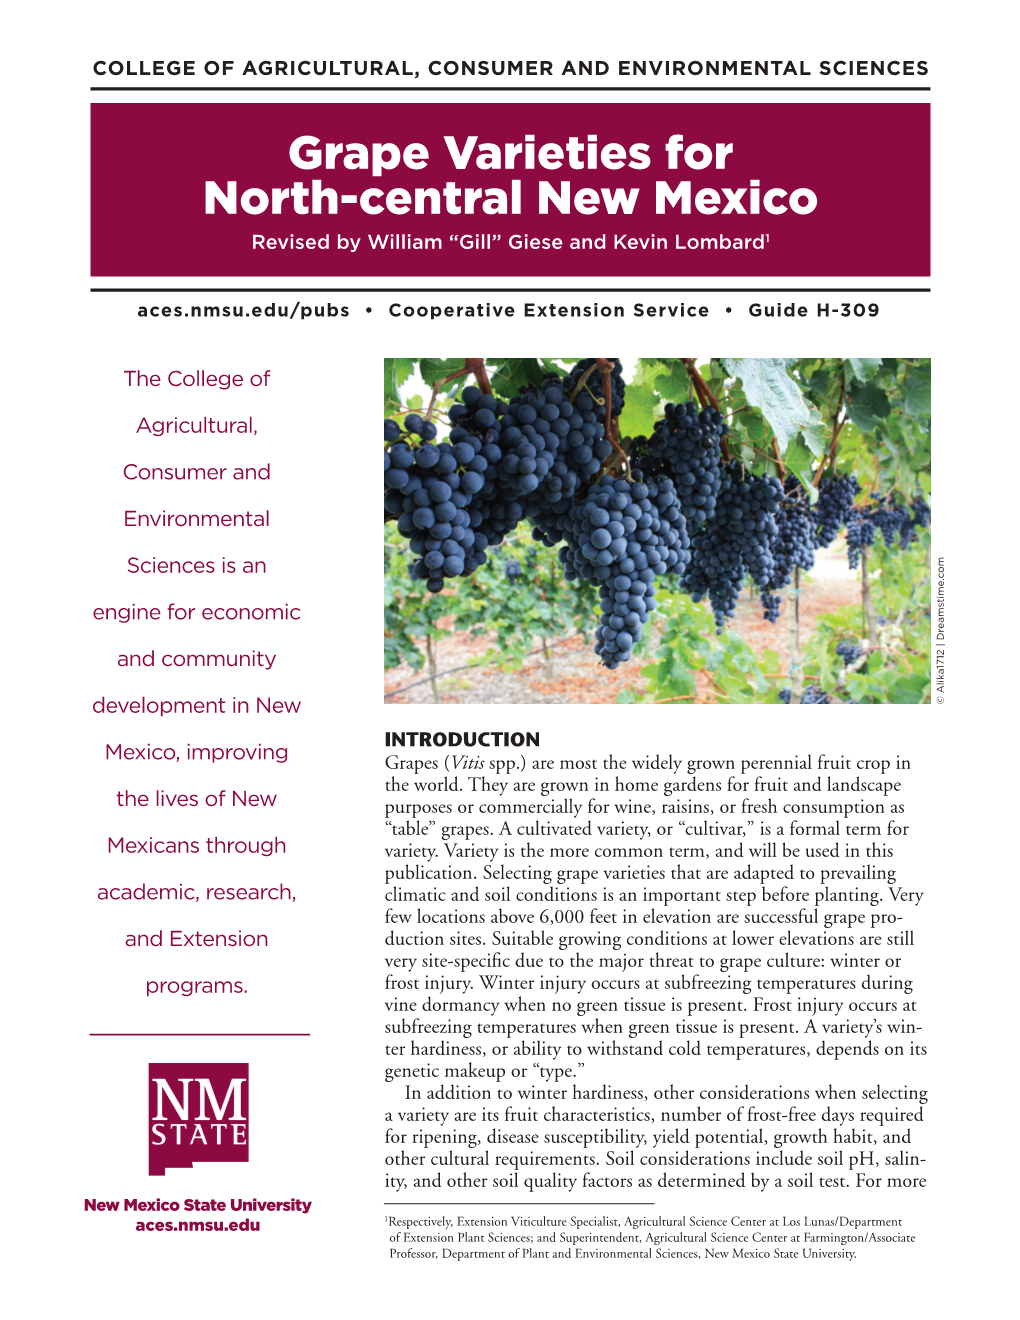 H-309: Grape Varieties for North-Central New Mexico